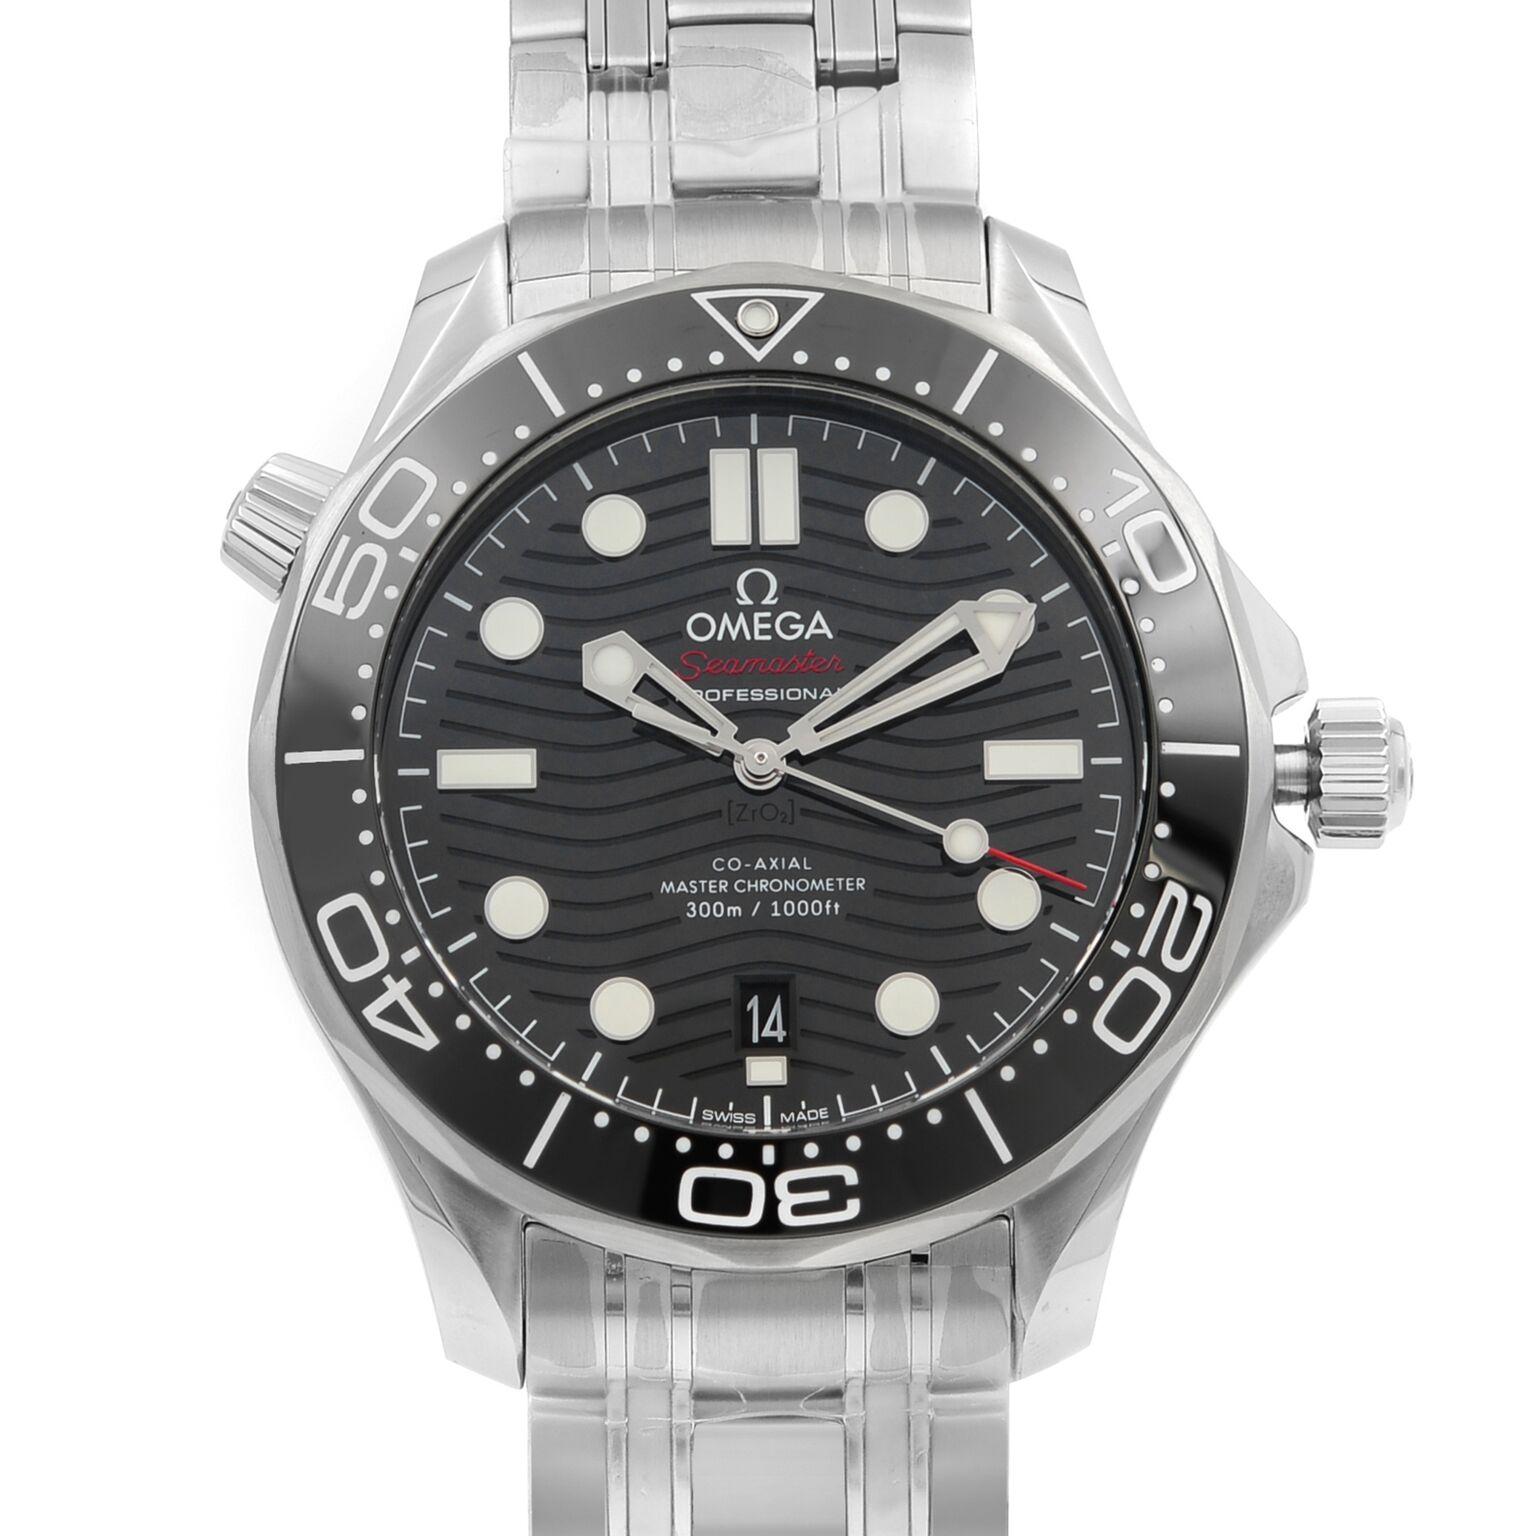 This brand new Omega Seamaster 210.30.42.20.01.001 is a beautiful men's timepiece that is powered by mechanical (automatic) movement which is cased in a stainless steel case. It has a round shape face, date indicator dial and has hand sticks & dots